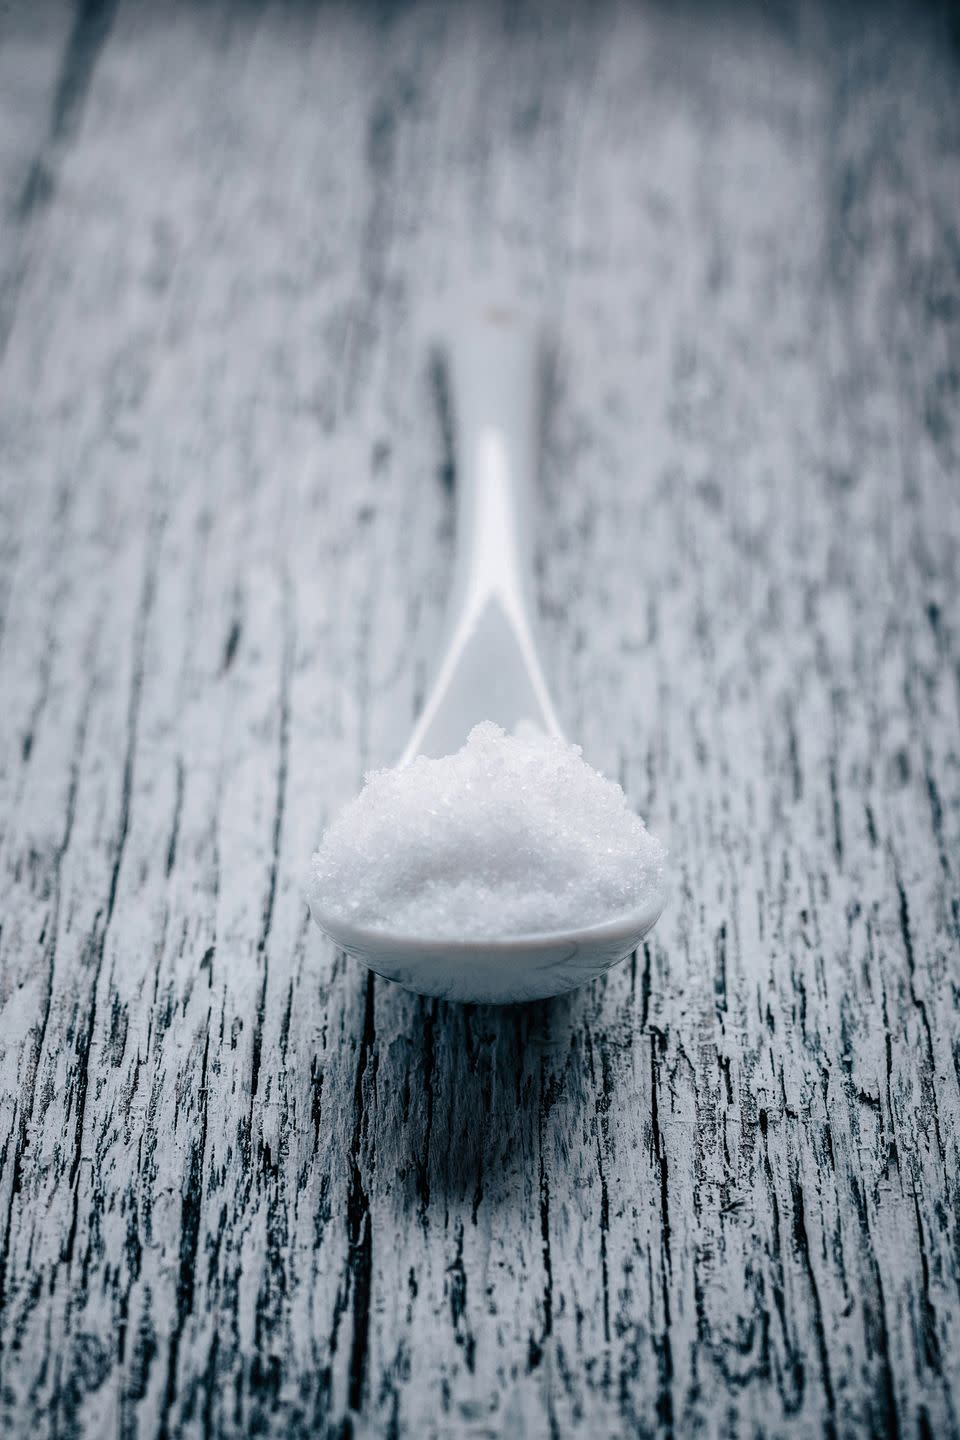 <p>Salt works in a number of magical ways to keep your kitchen clean.</p><p>You can simply pour it down your kitchen sink to neutralise any nasty smells, and keep grease from building up.</p><p>Plus, it's great for cleaning your fridge. Salt mixed with soda water can be used to wipe down and deodorise the inside of your refrigerator. This saves having chemical-y cleaners near your food.</p>